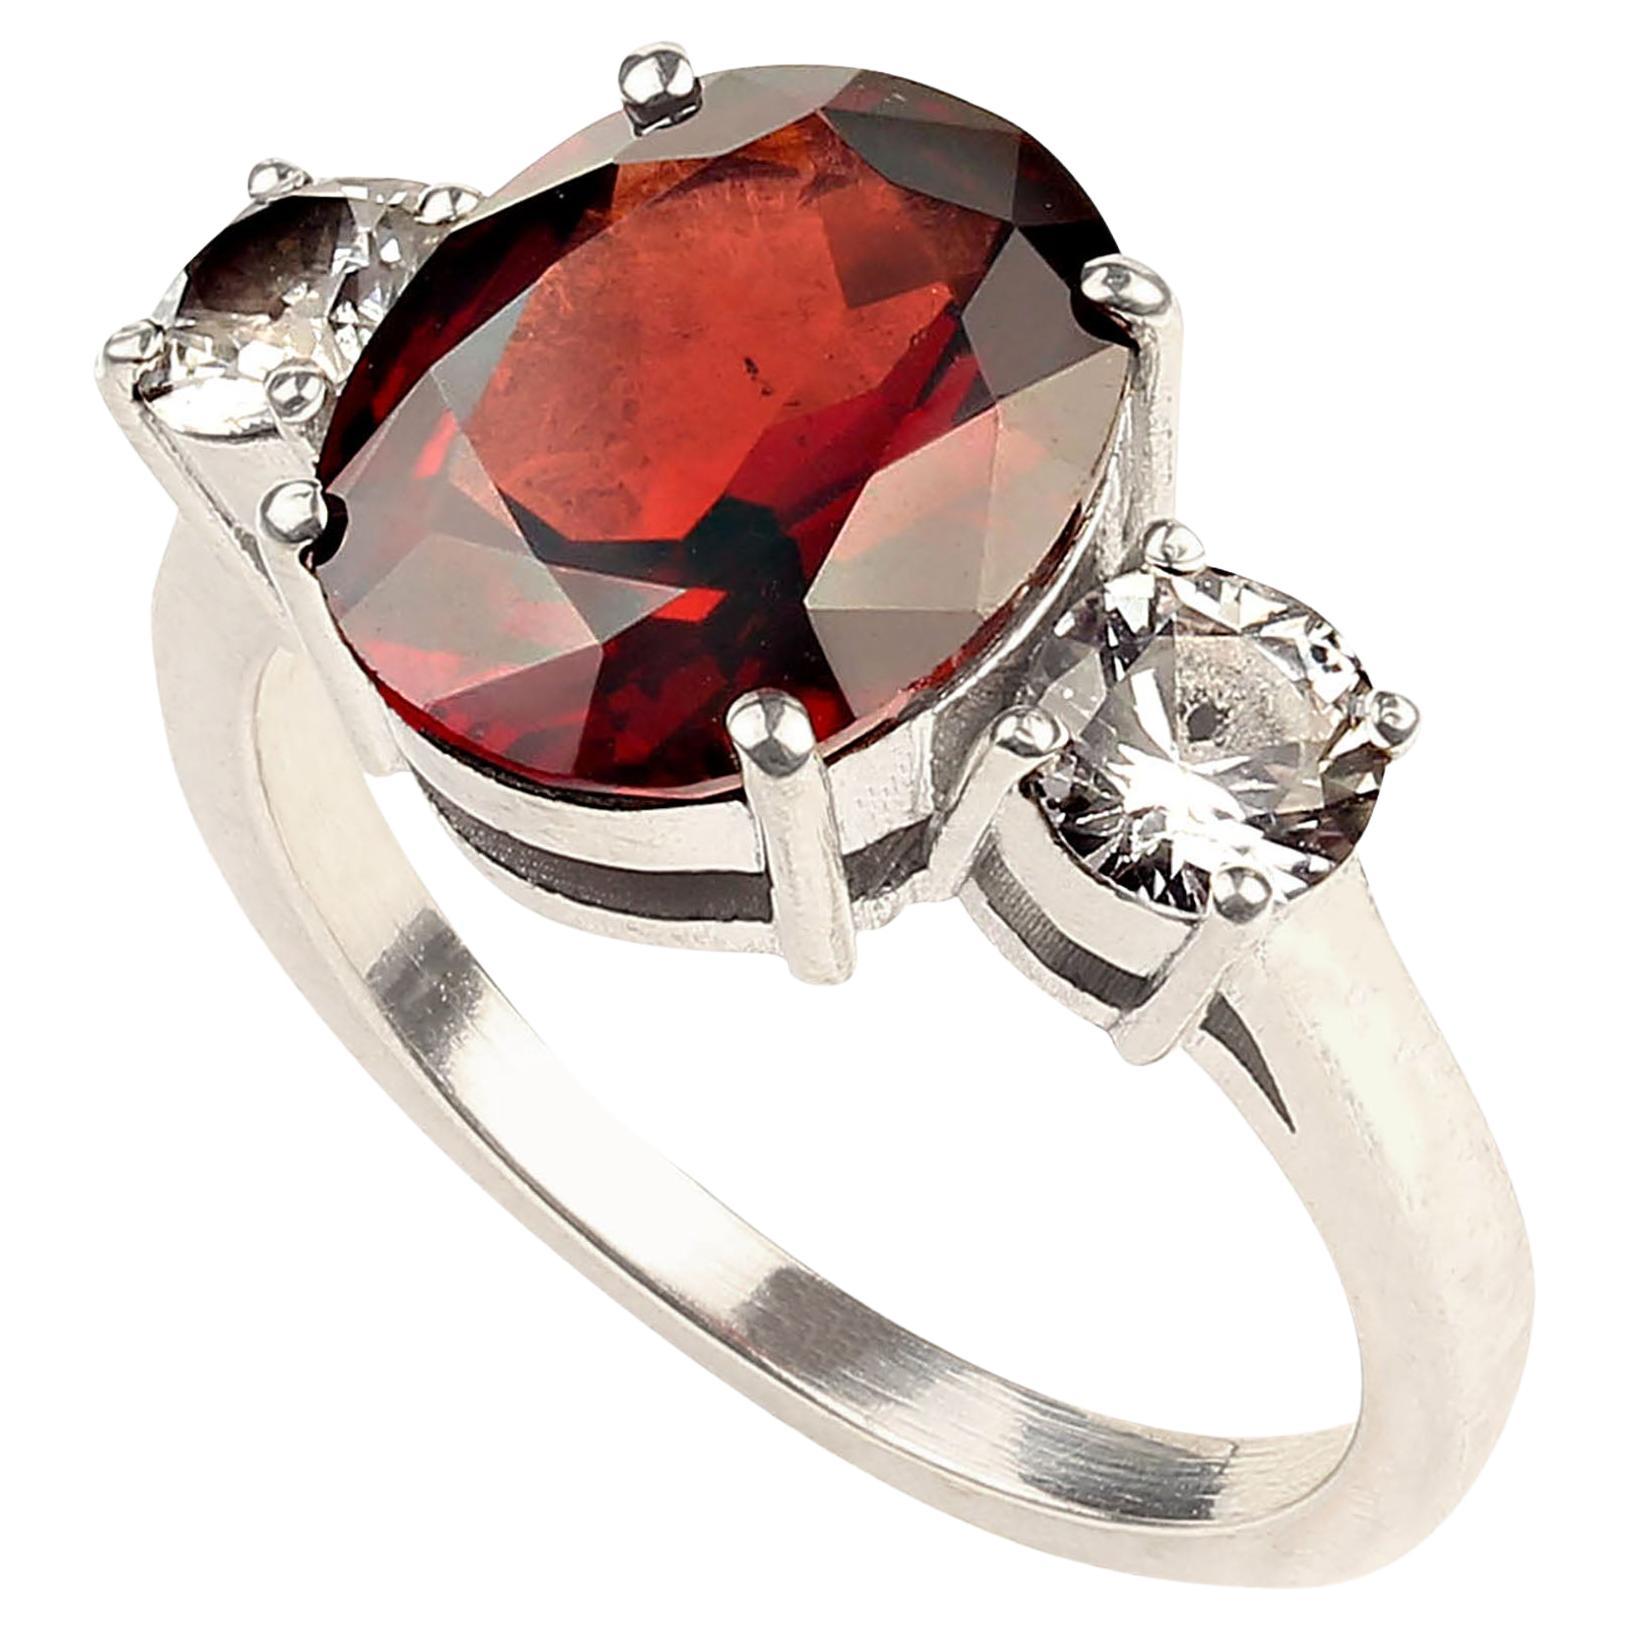 Classic three stone ring of gorgeous Garnet and sparkling white sapphires. This large oval  garnet weighs in at 5.03ct. The two white round sapphires are total weight of 1.06ct. These gemstones are set in Sterling Silver. This is that great ring you